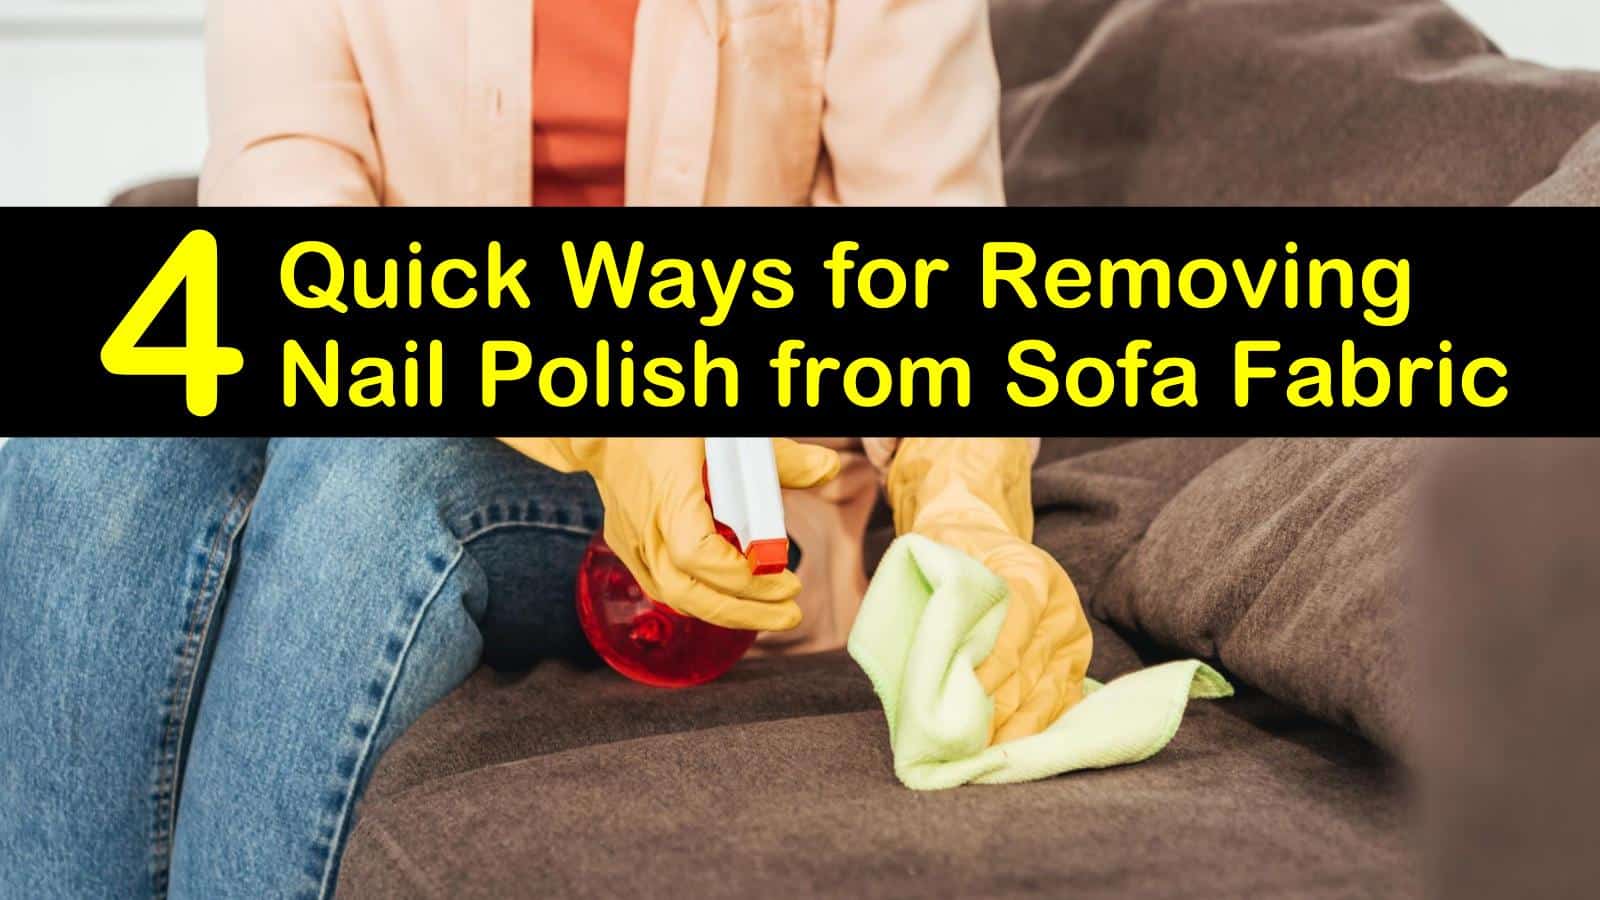 4 Quick Ways for Removing Nail Polish from Sofa Fabric